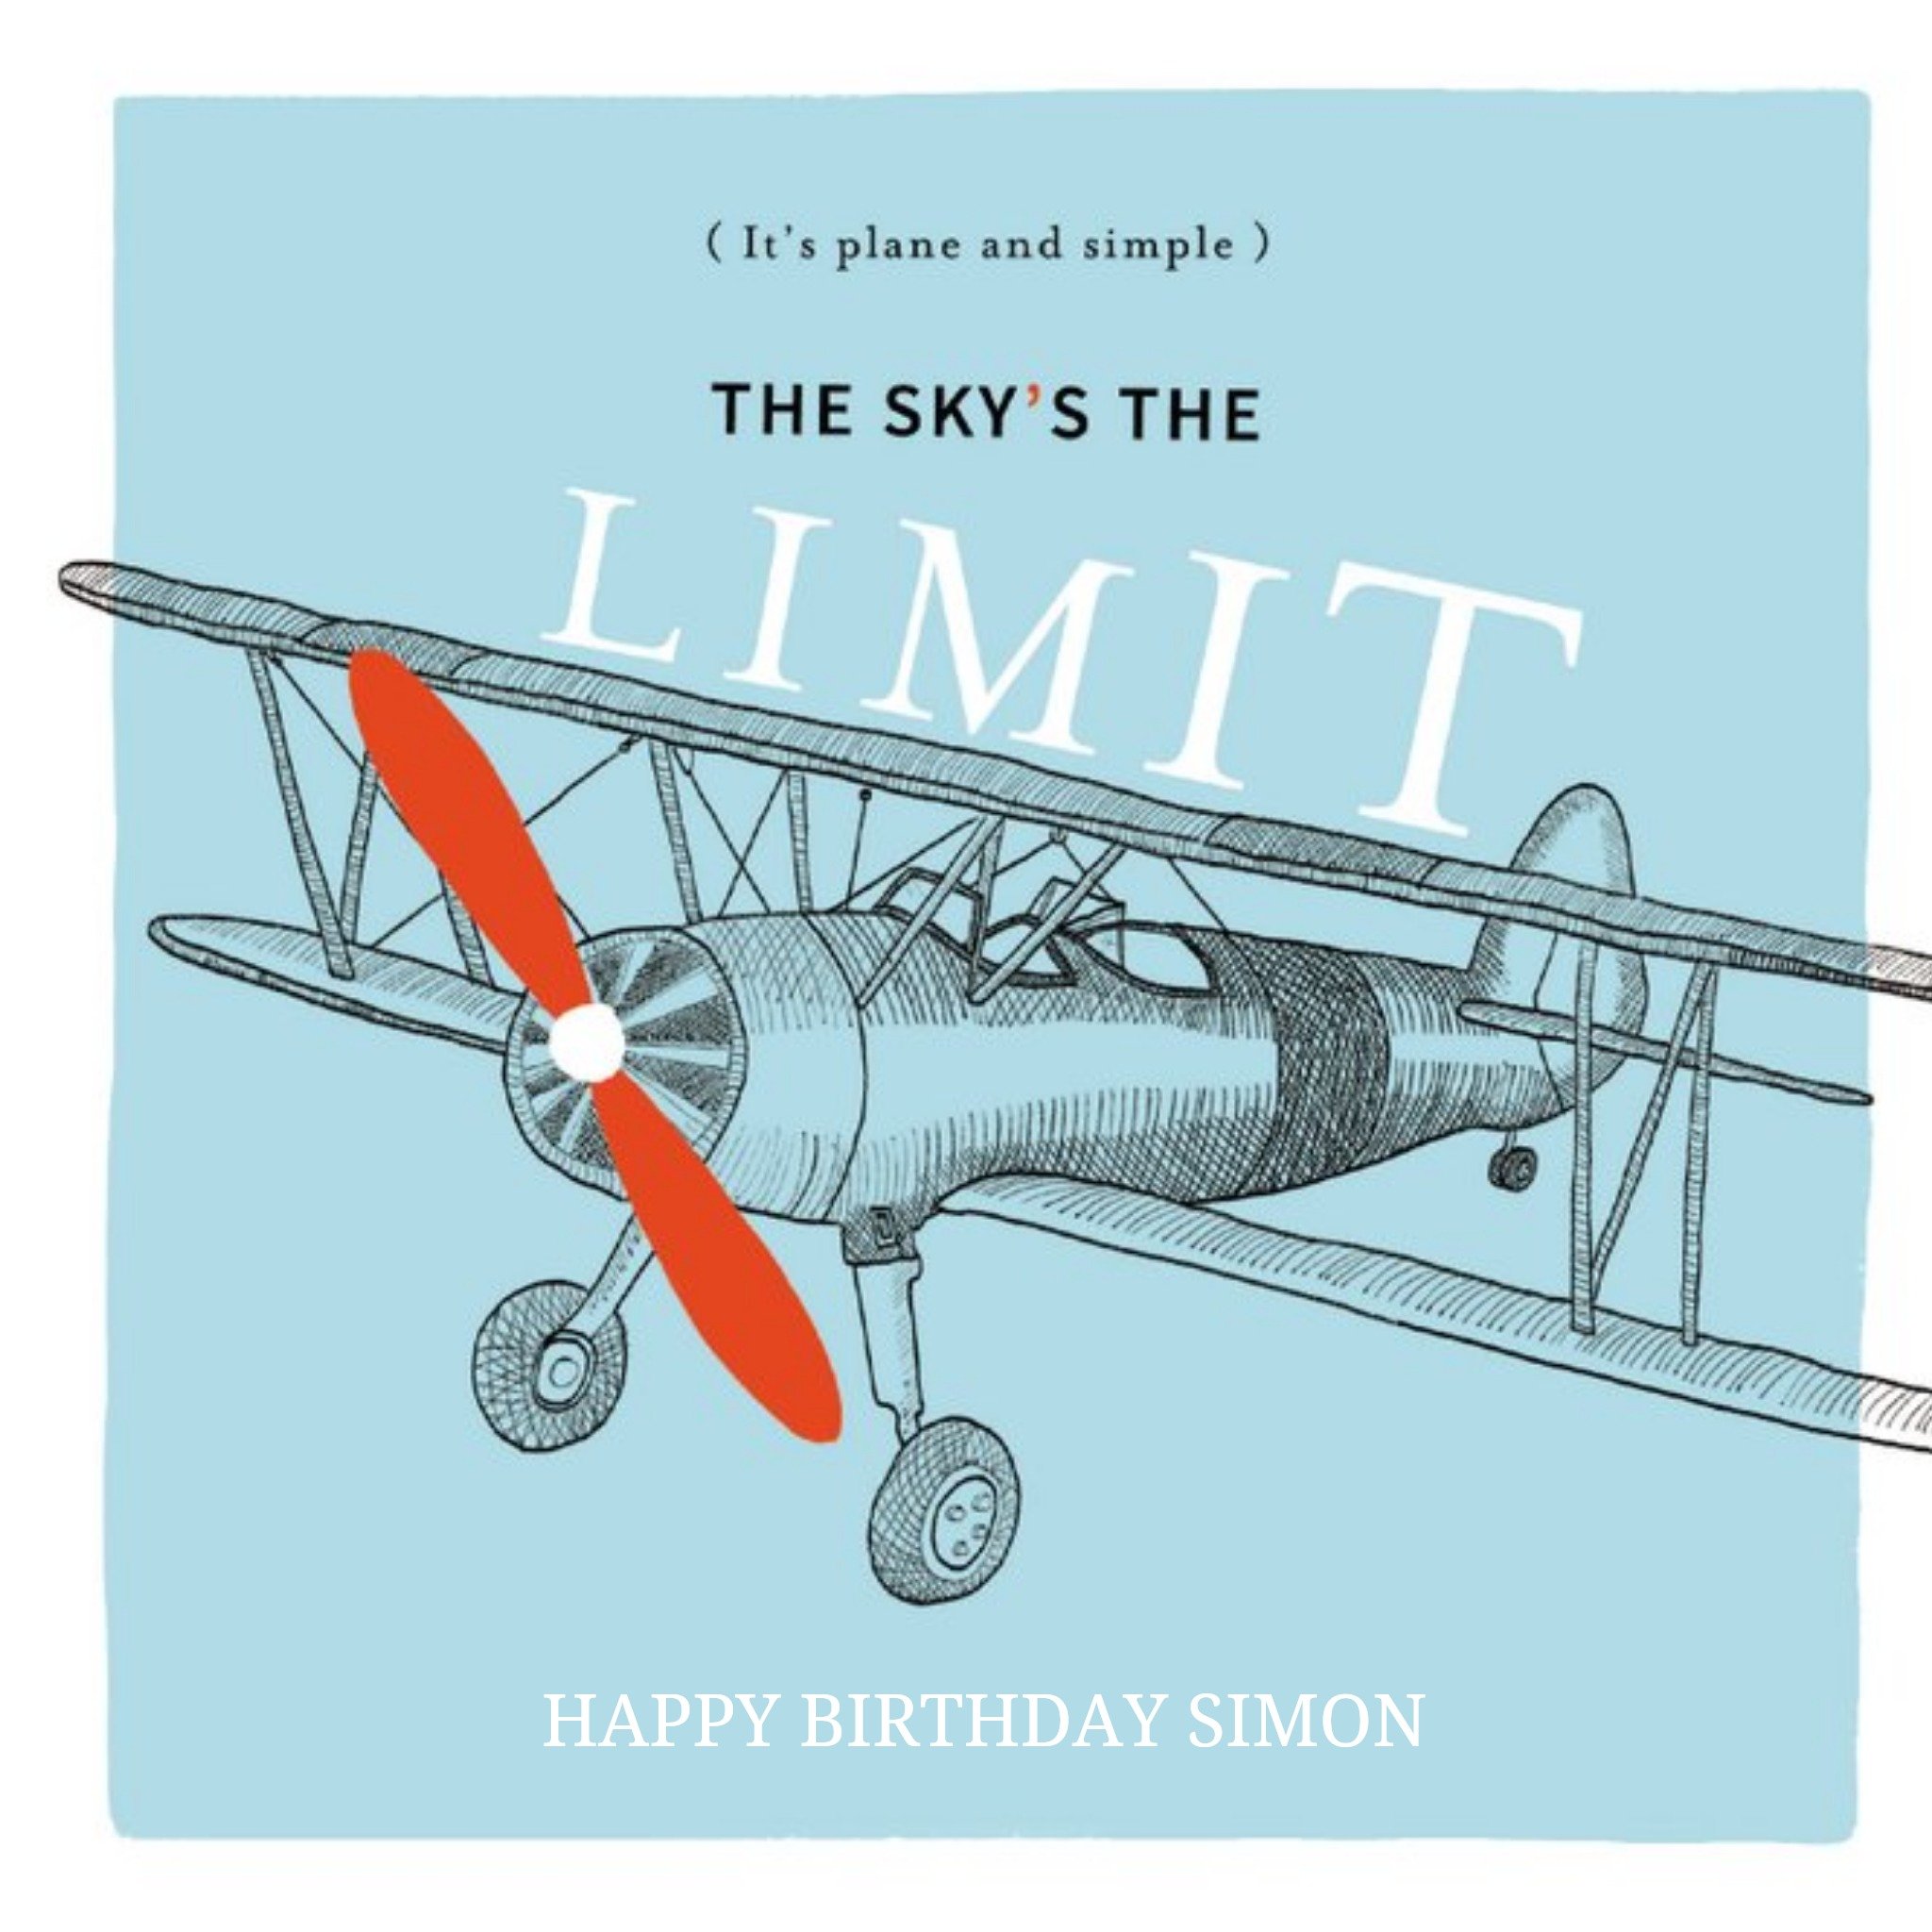 Moonpig Birthday Card - The Sky's The Limit - Plane - Plane And Simple, Large